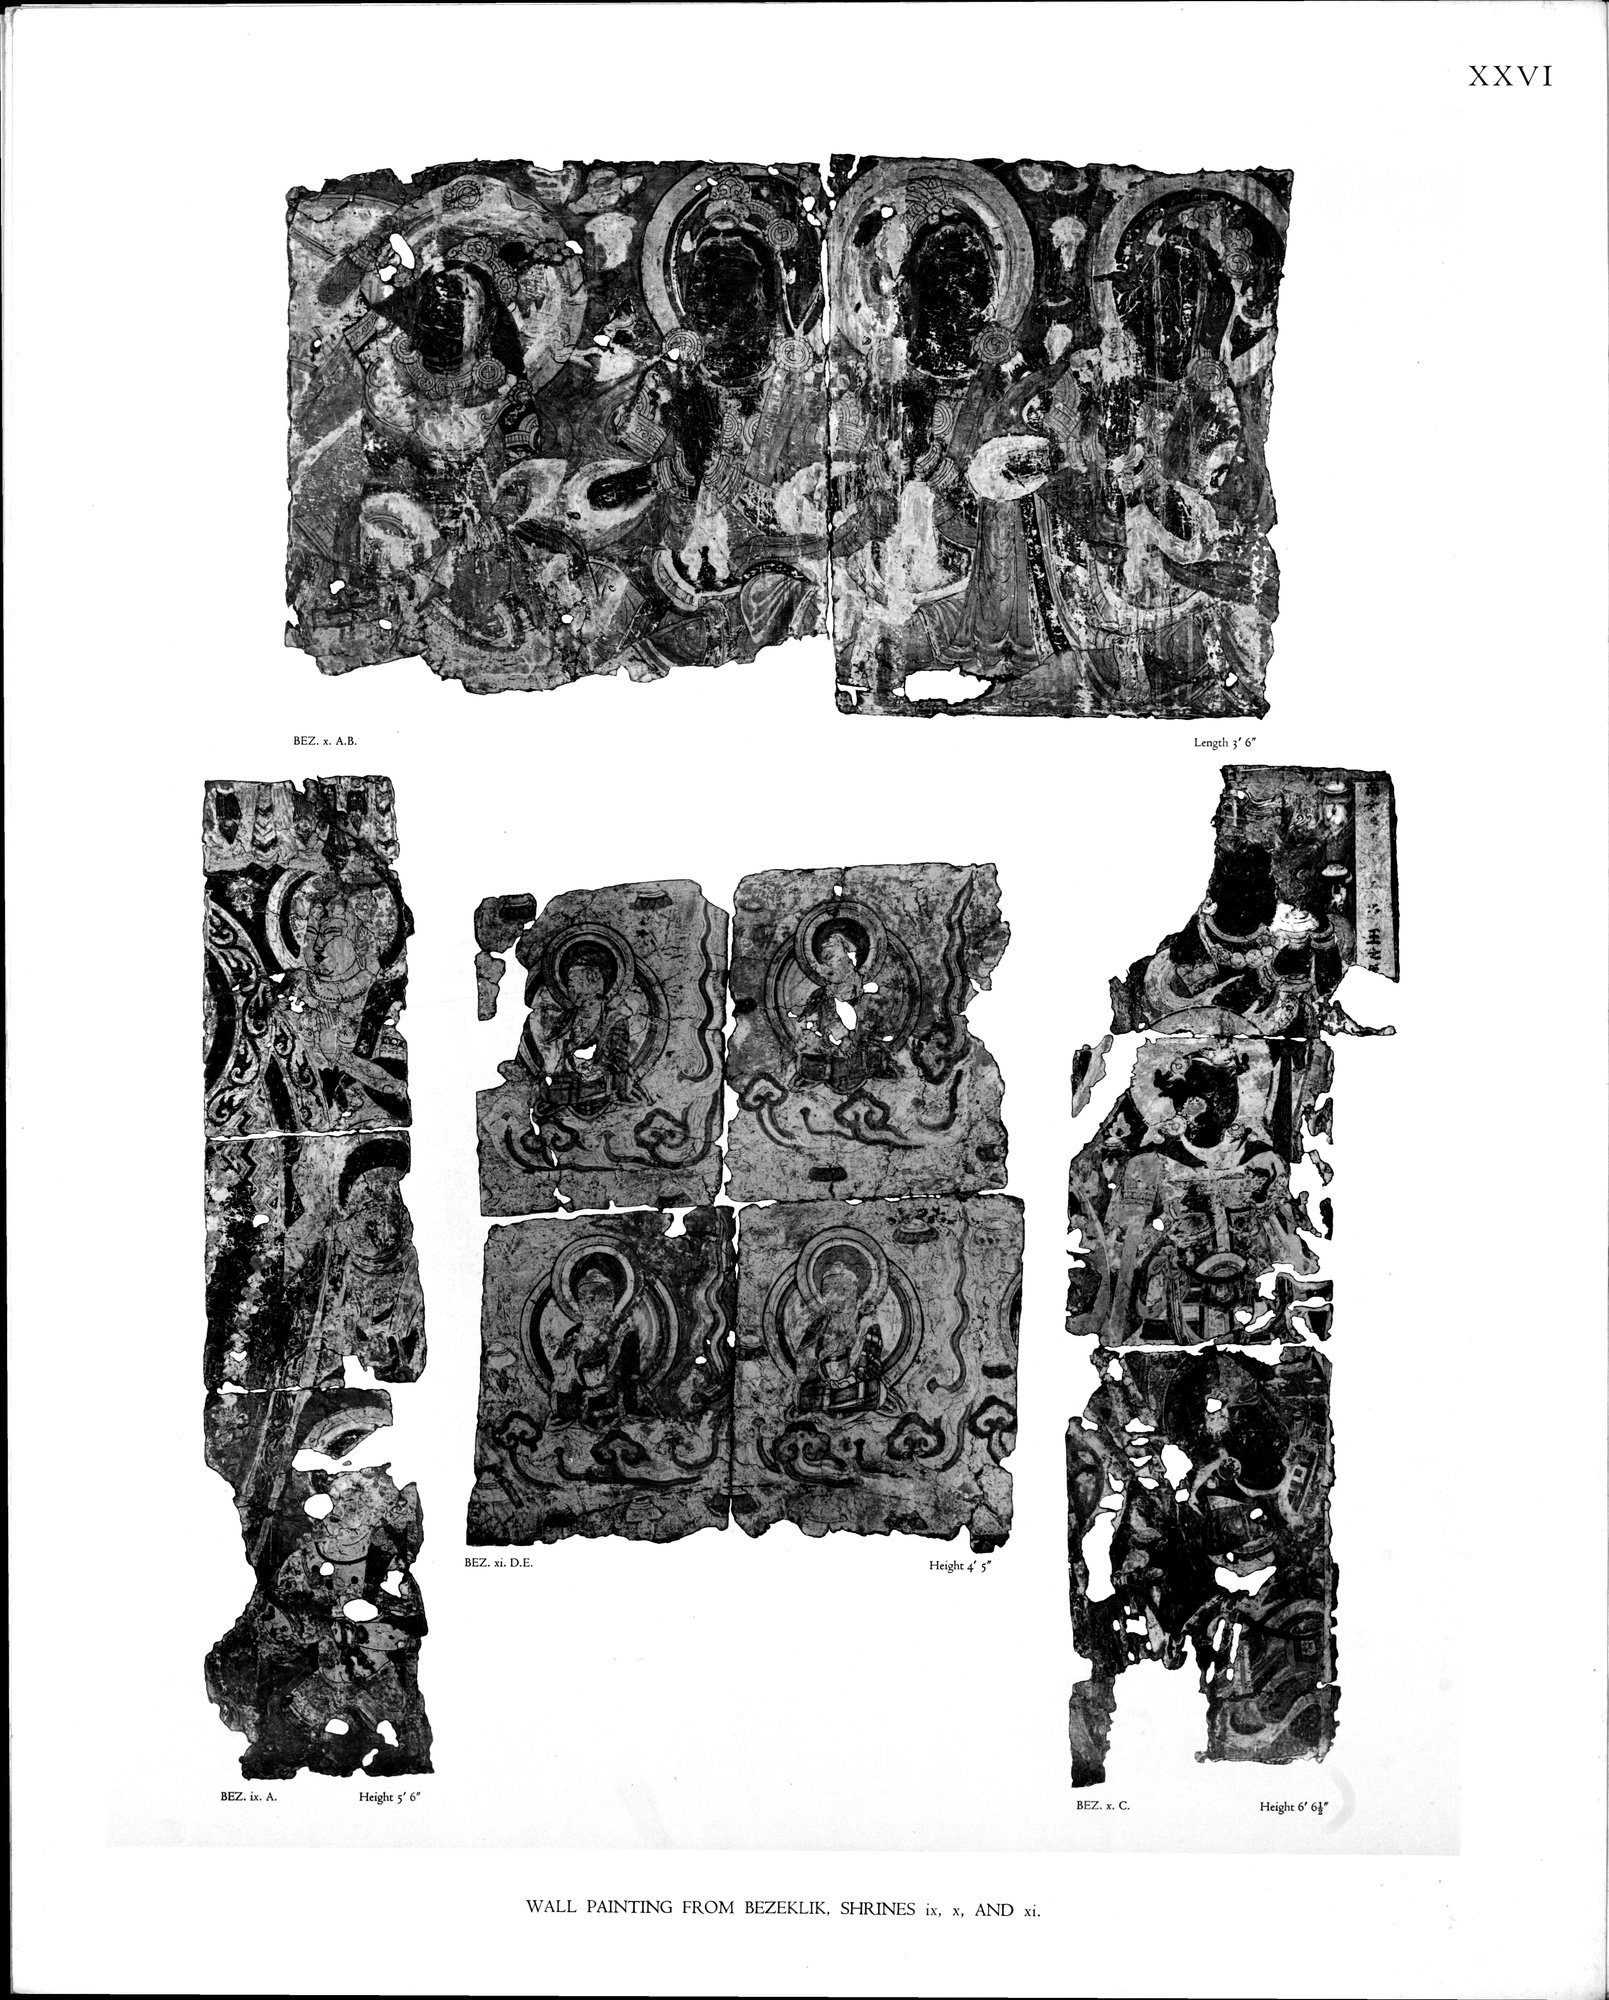 Wall Paintings from Ancient Shrines in Central Asia : vol.2 / Page 29 (Grayscale High Resolution Image)